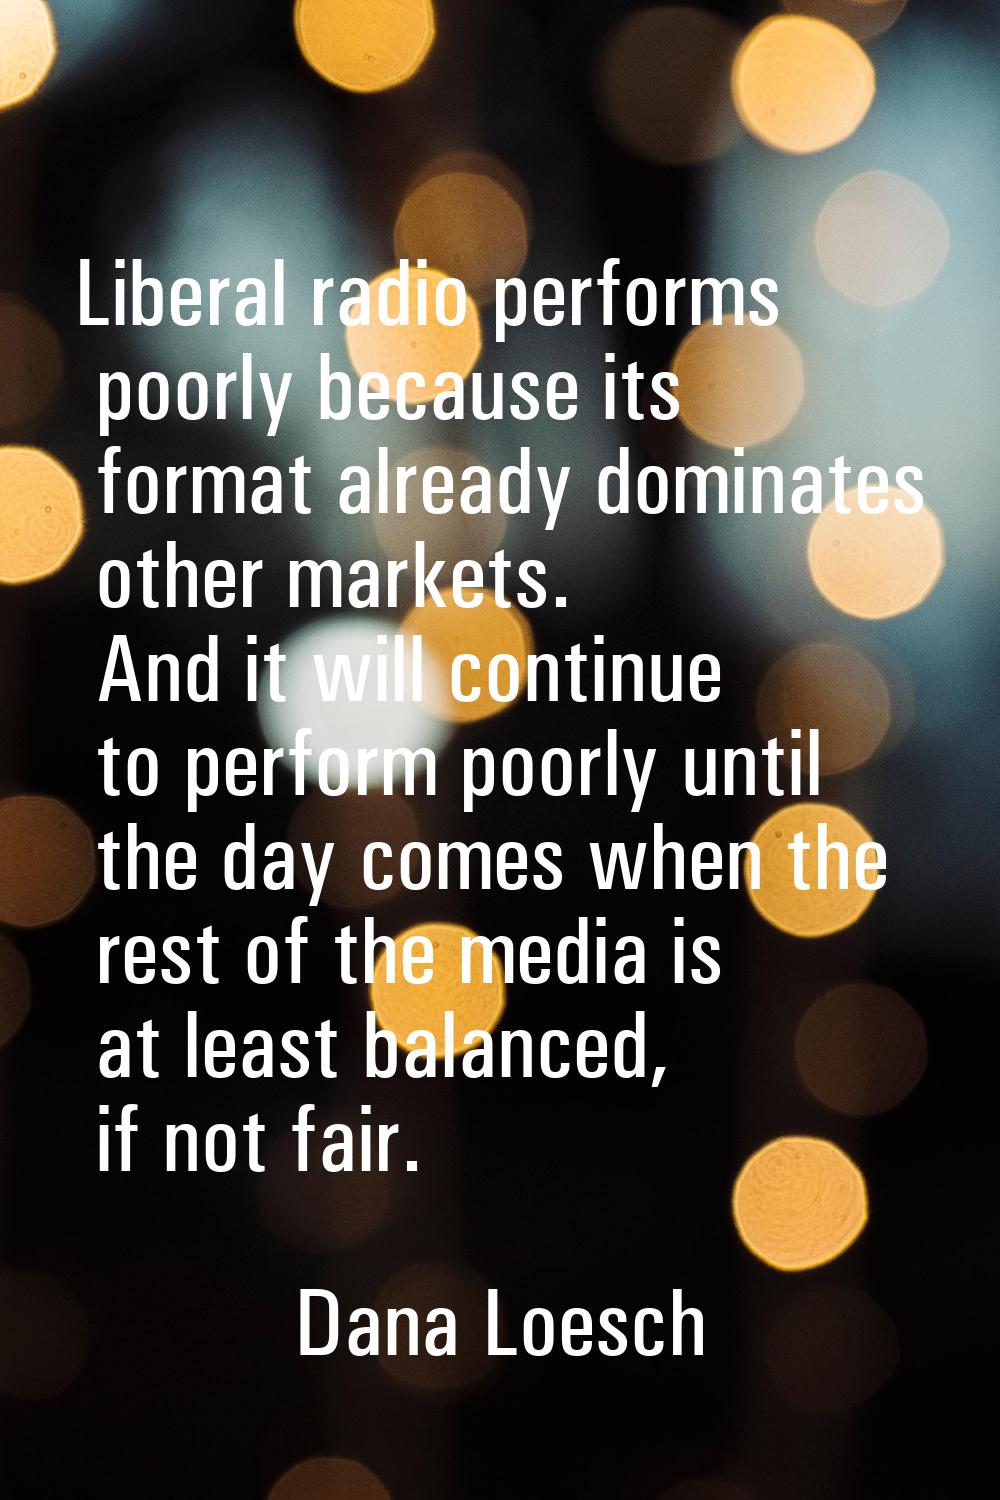 Liberal radio performs poorly because its format already dominates other markets. And it will conti